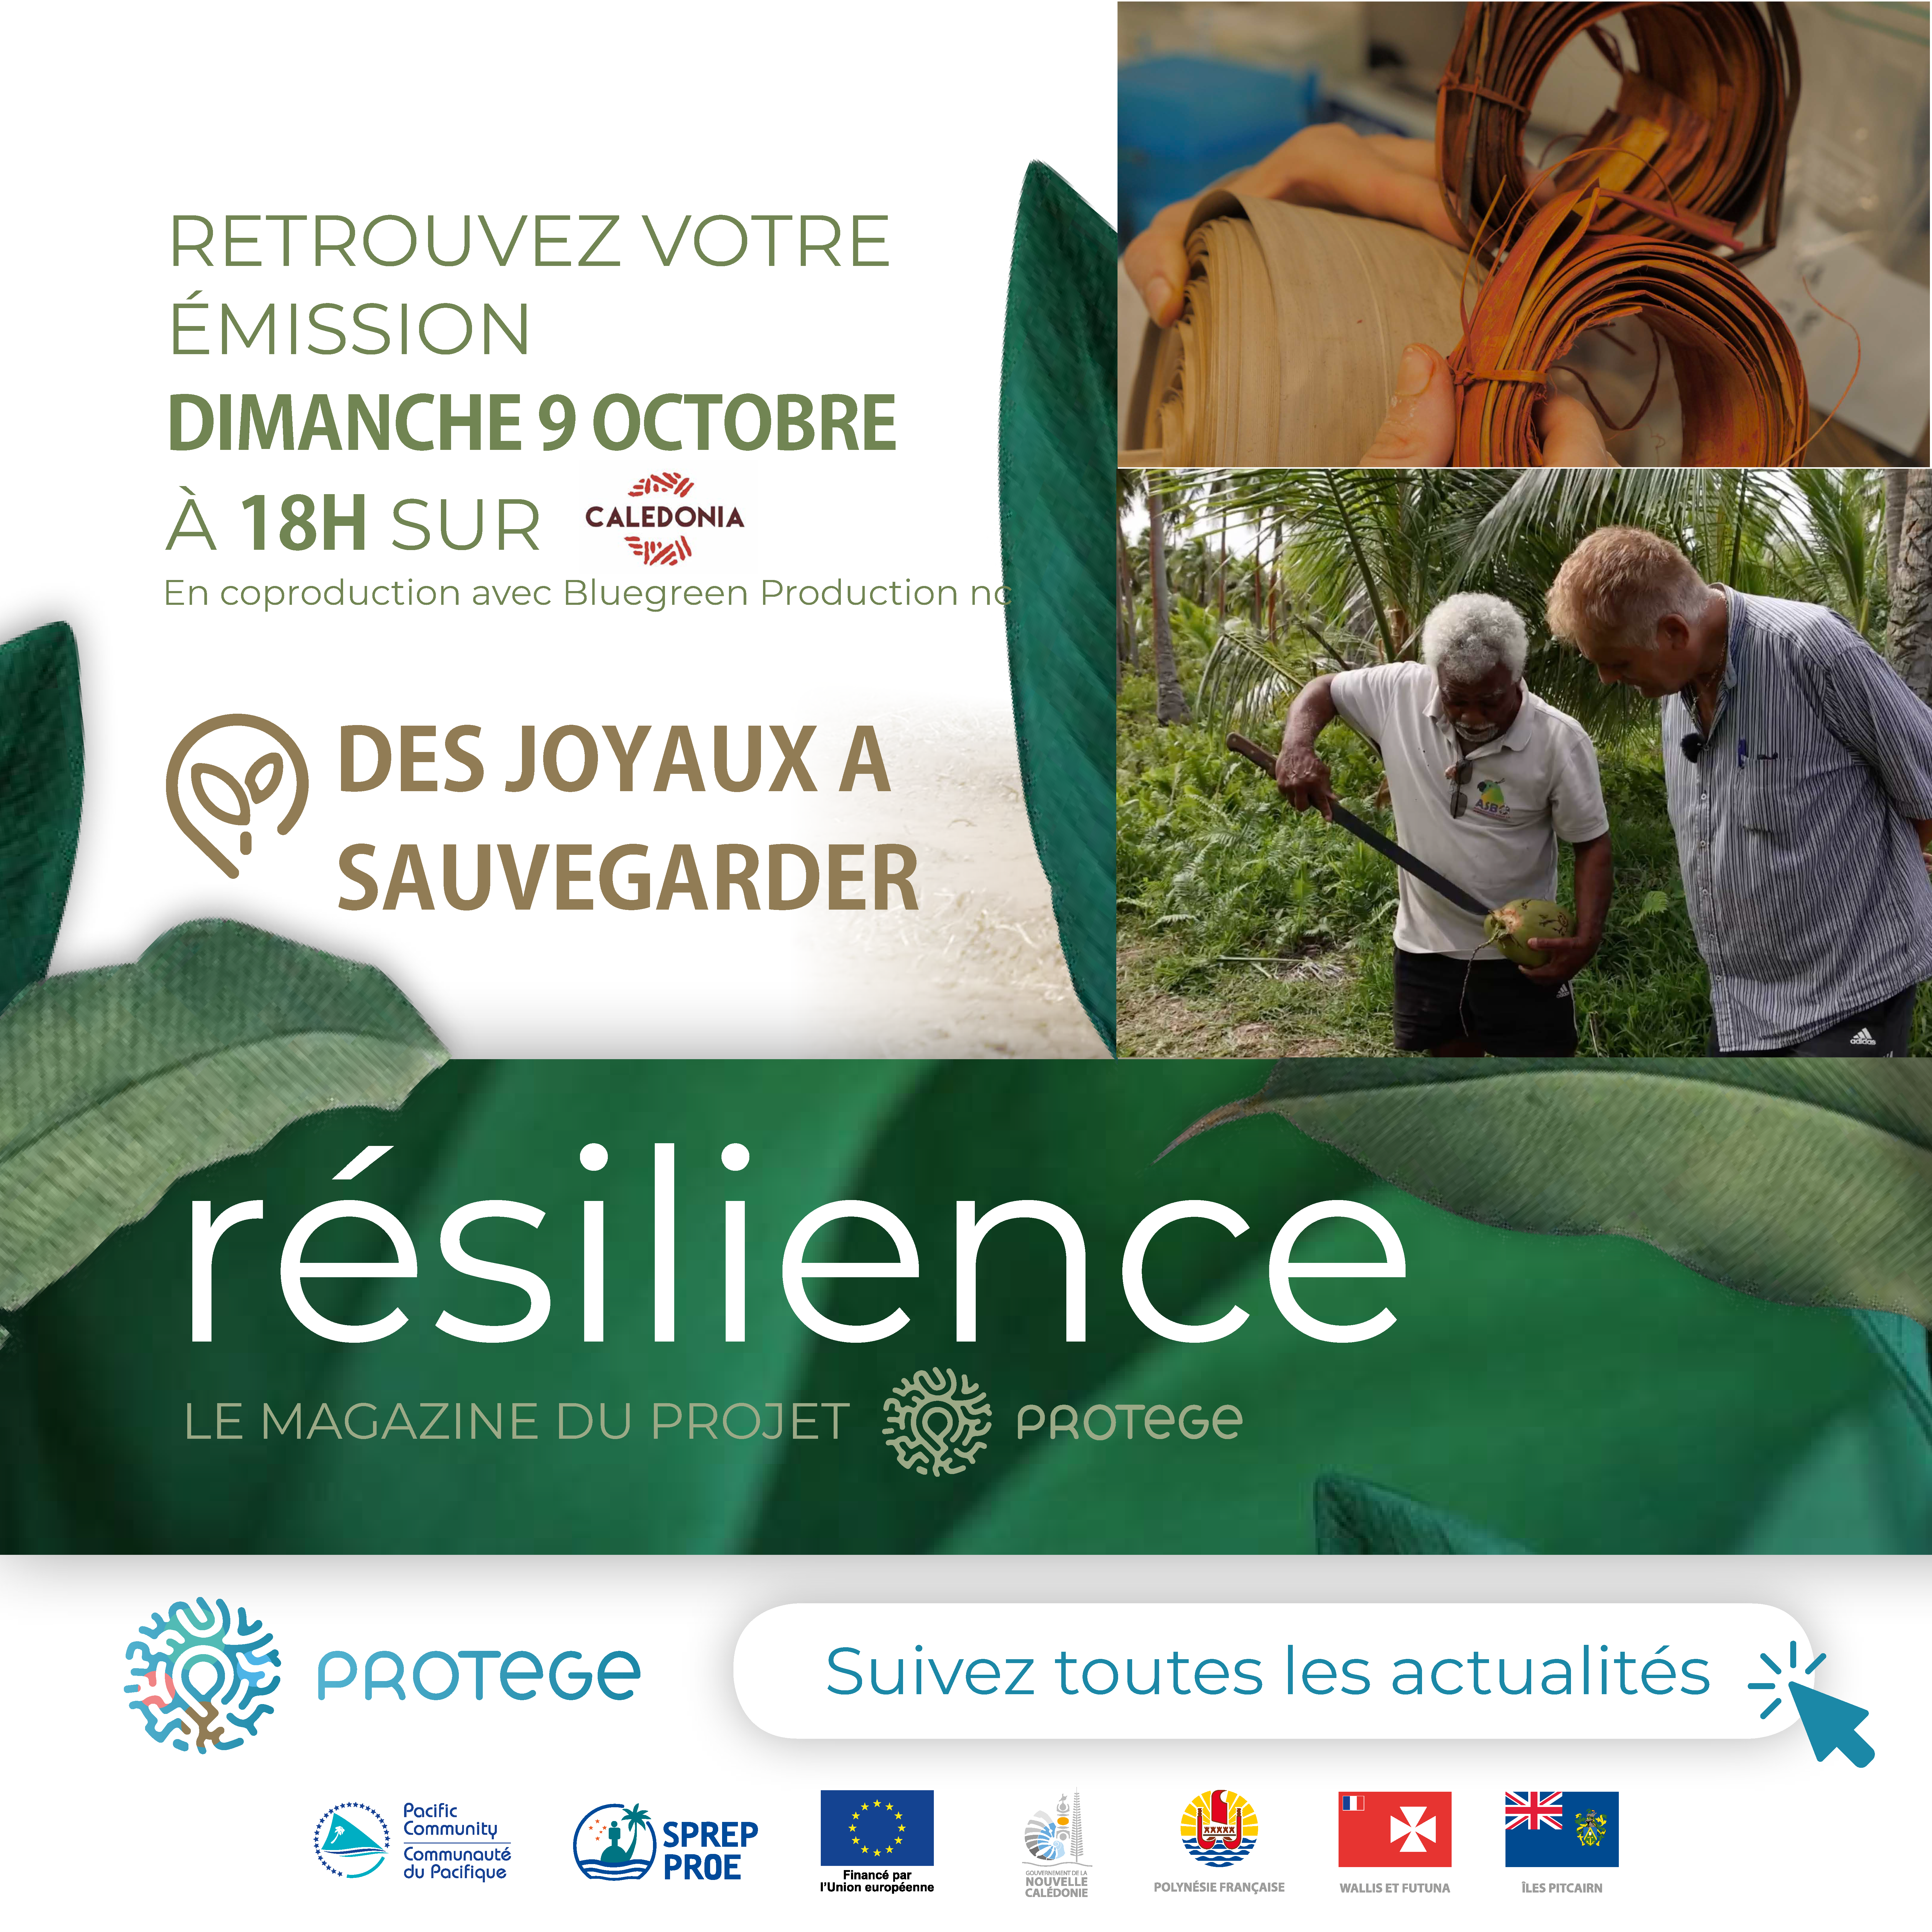 Oceanian jewels to save - Resilience TV Show - PROTEGE Programme, funded by European Union